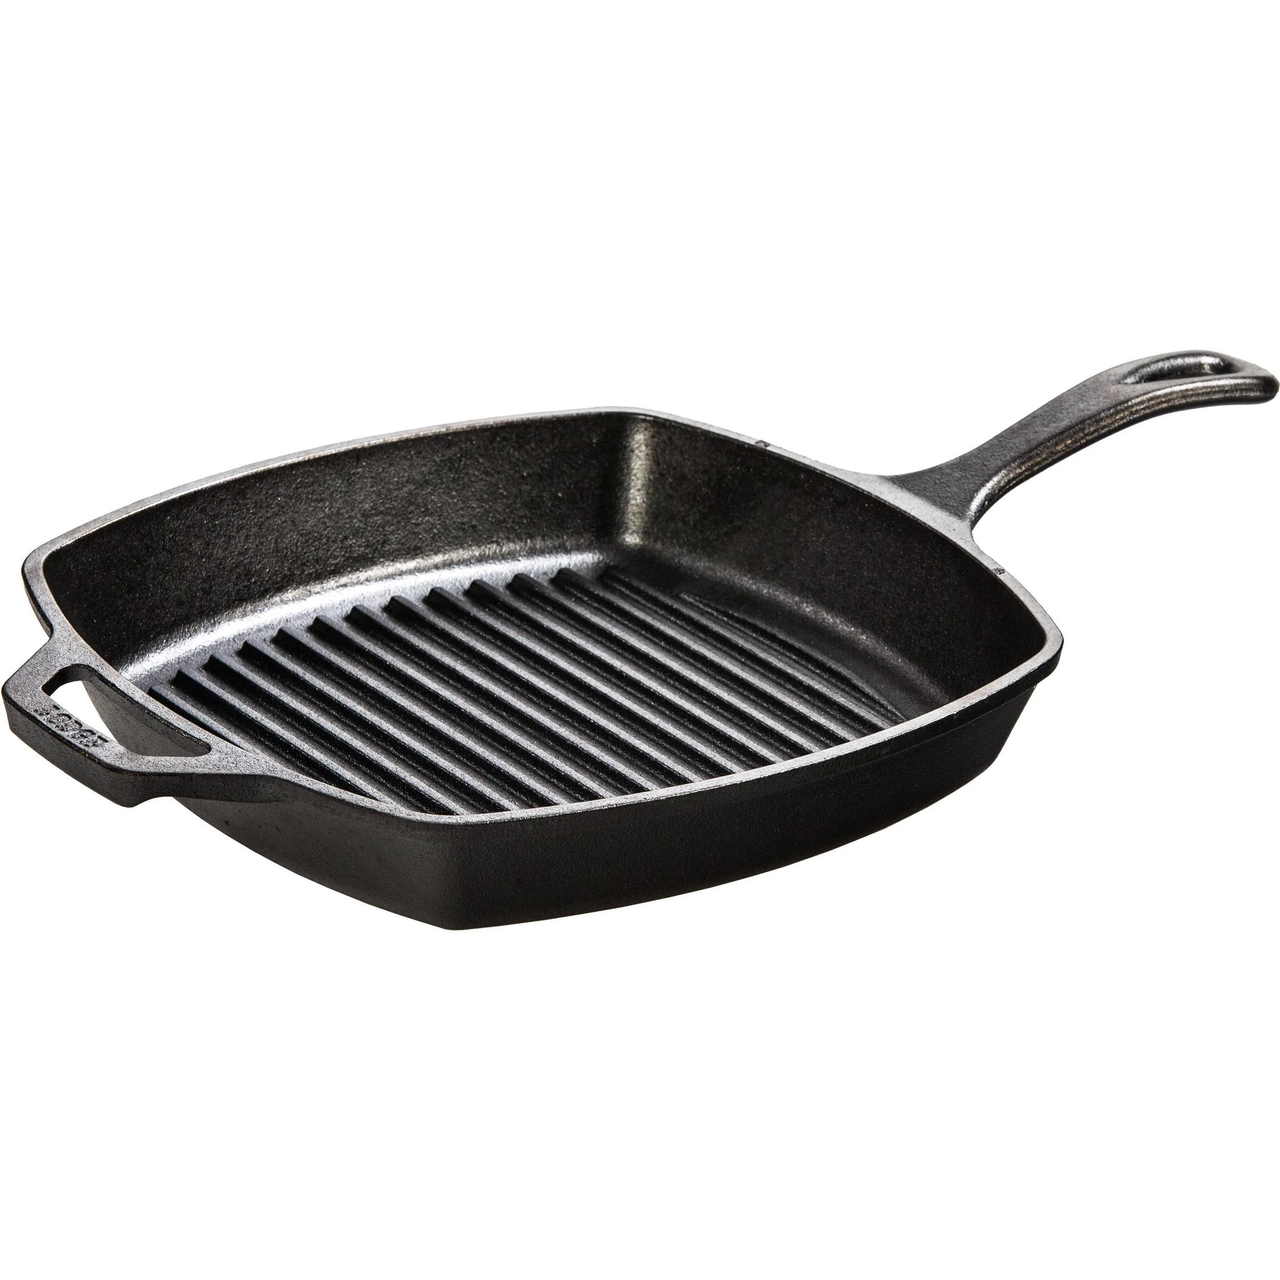 Lodge Cast Iron Seasoned Double Play Reversible Grill/Griddle